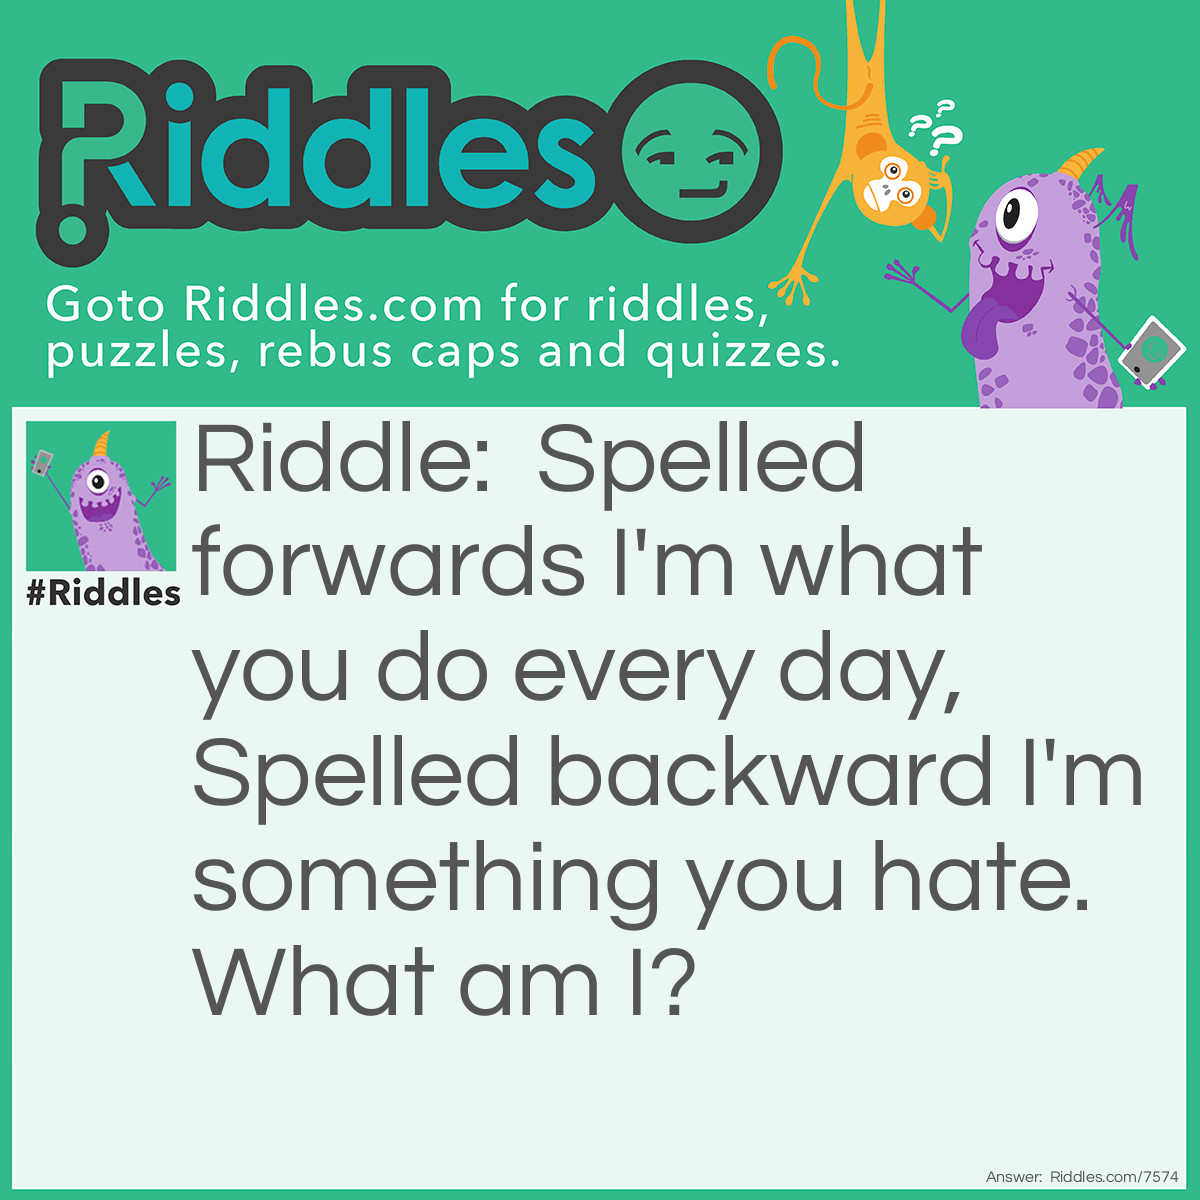 Riddle: Spelled forwards I'm what you do everyday, Spelled backwards I'm something you hate. What am I? Answer: Live